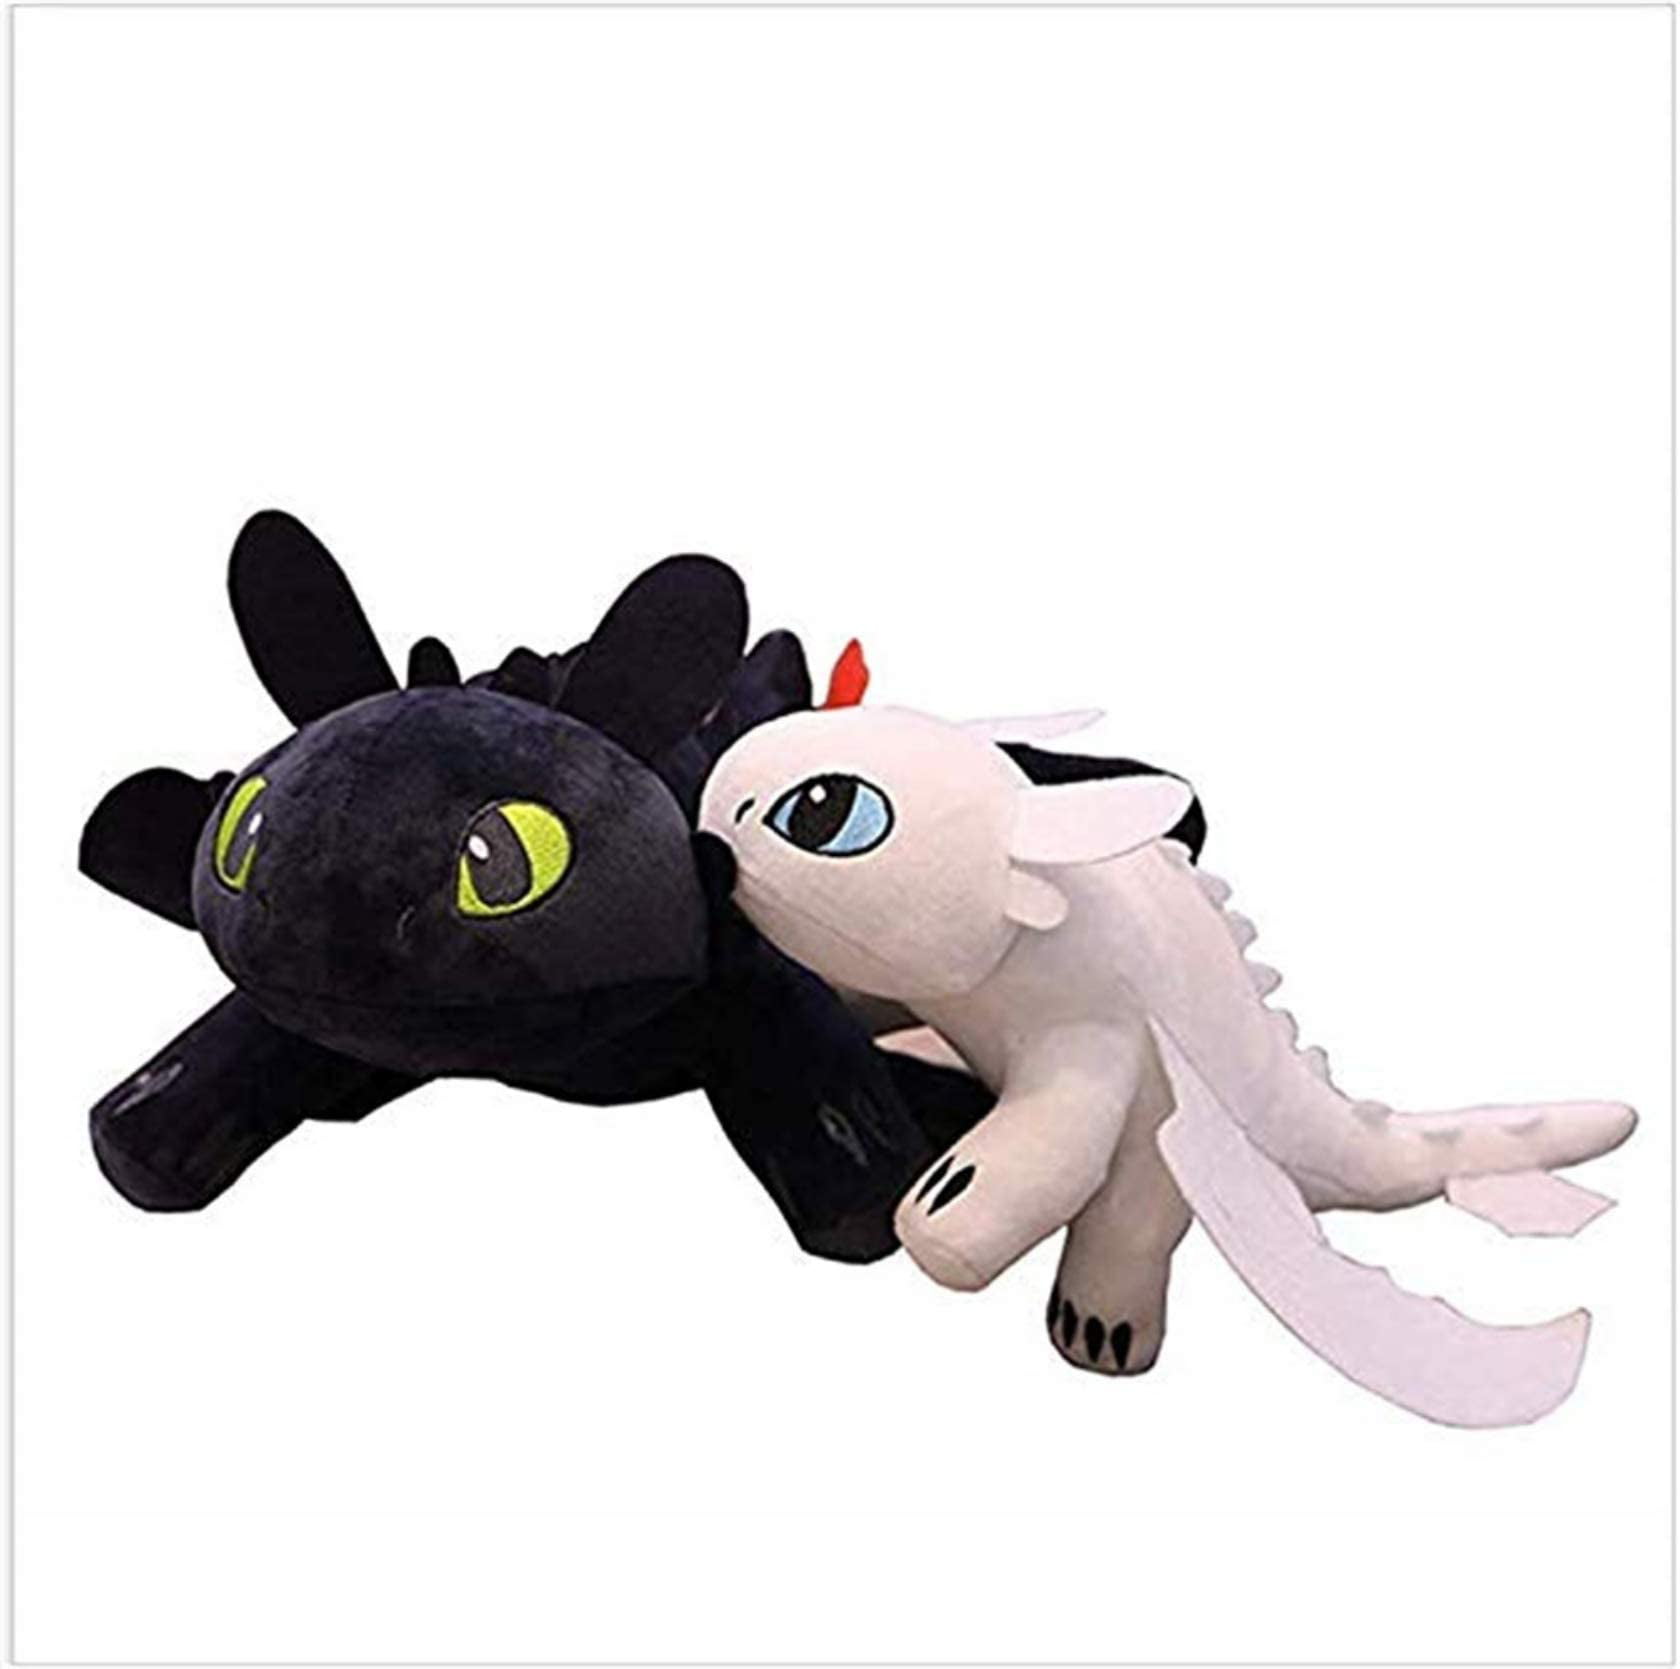 How To Train Your Dragon Figure Toothless Night Fury Kids Plush Stuffed Toy 7" 